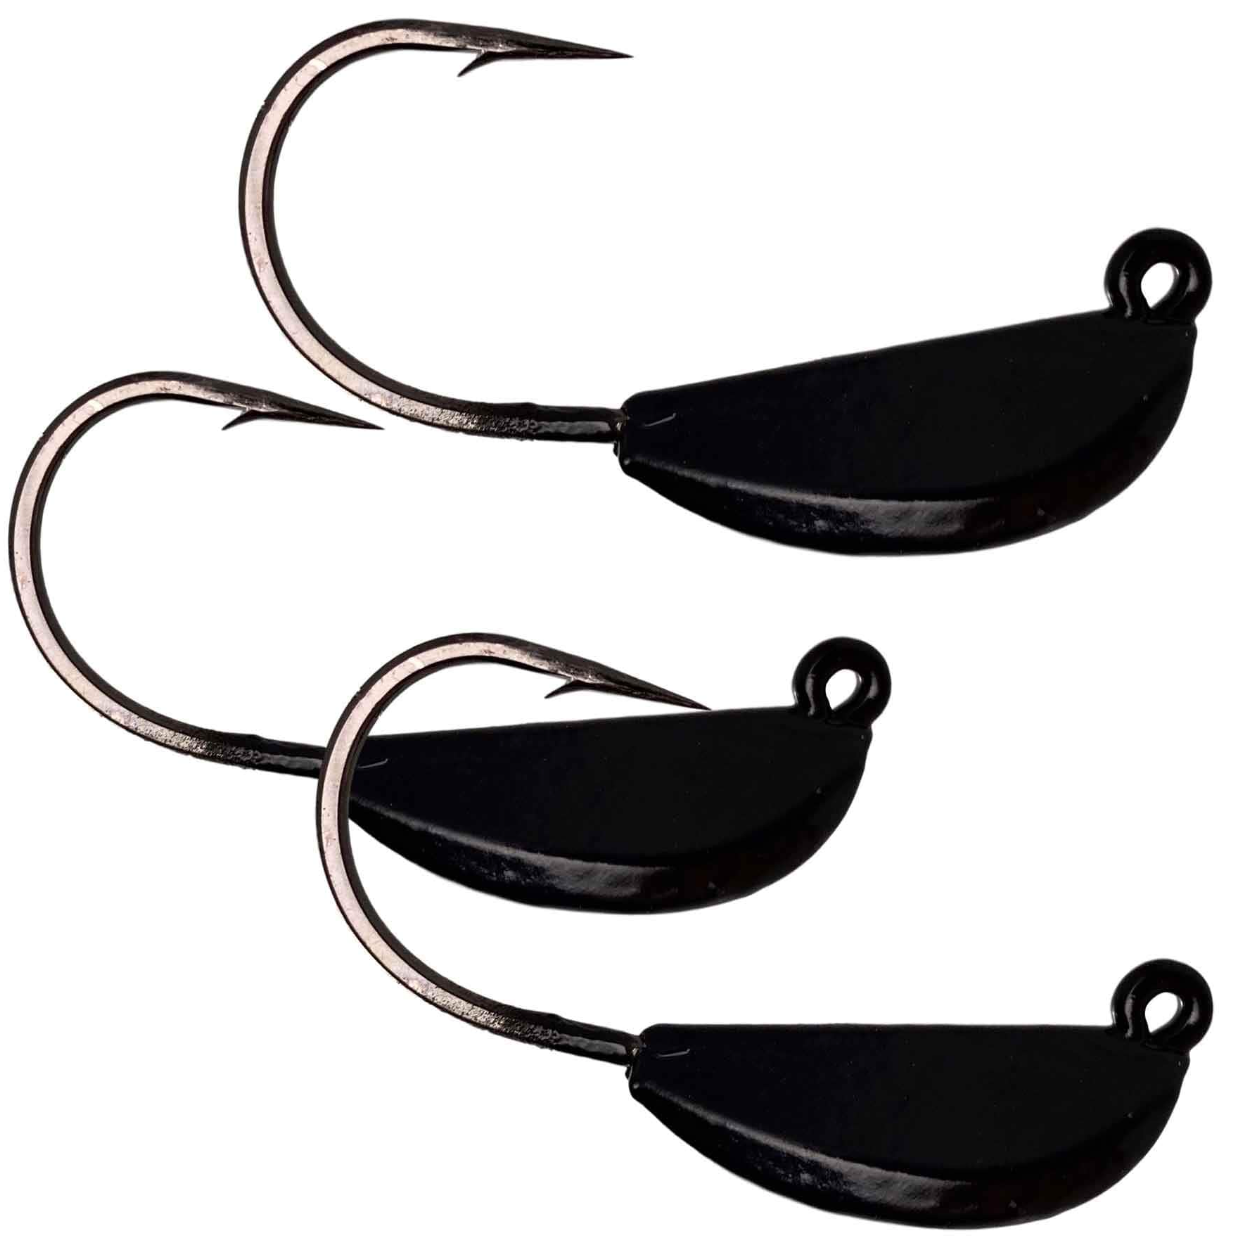 MagicTail Back Bay Tog Jigs